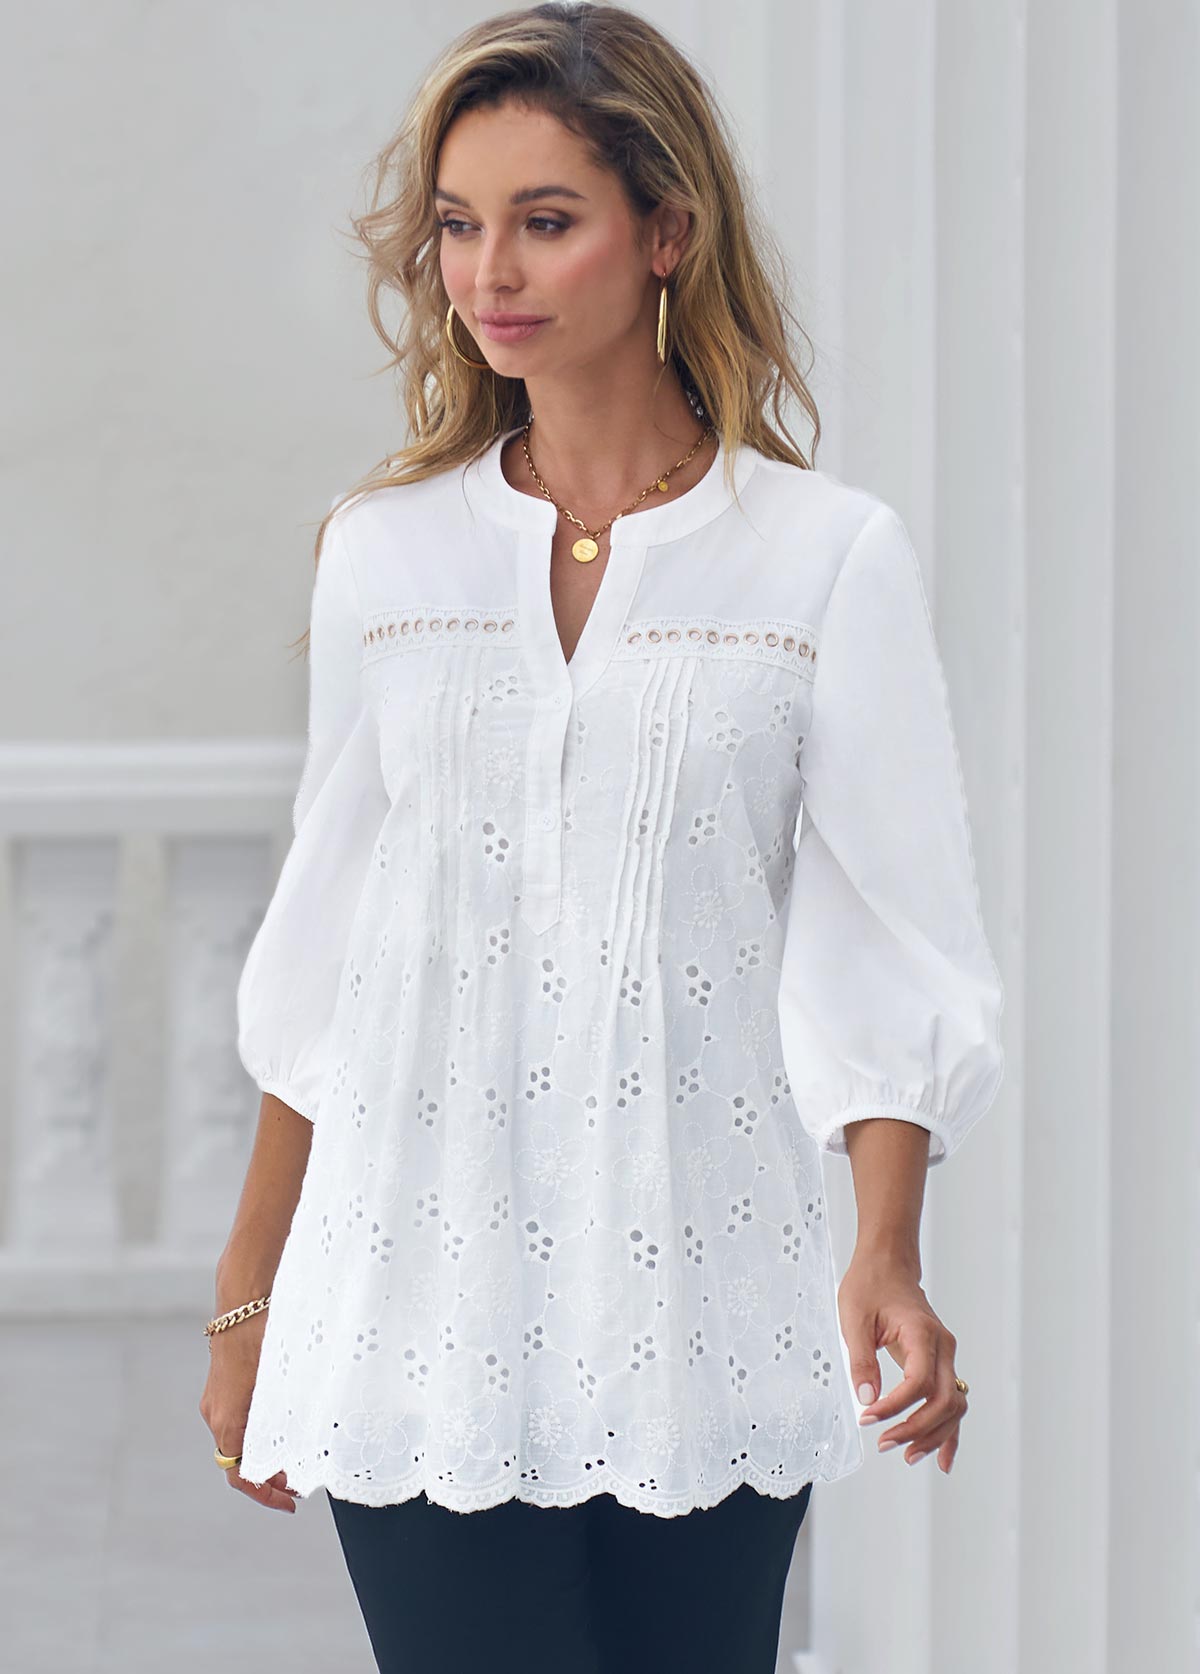 Embroidered Hollow Out Split Neck White Blouse | modlily.com - USD 11.99